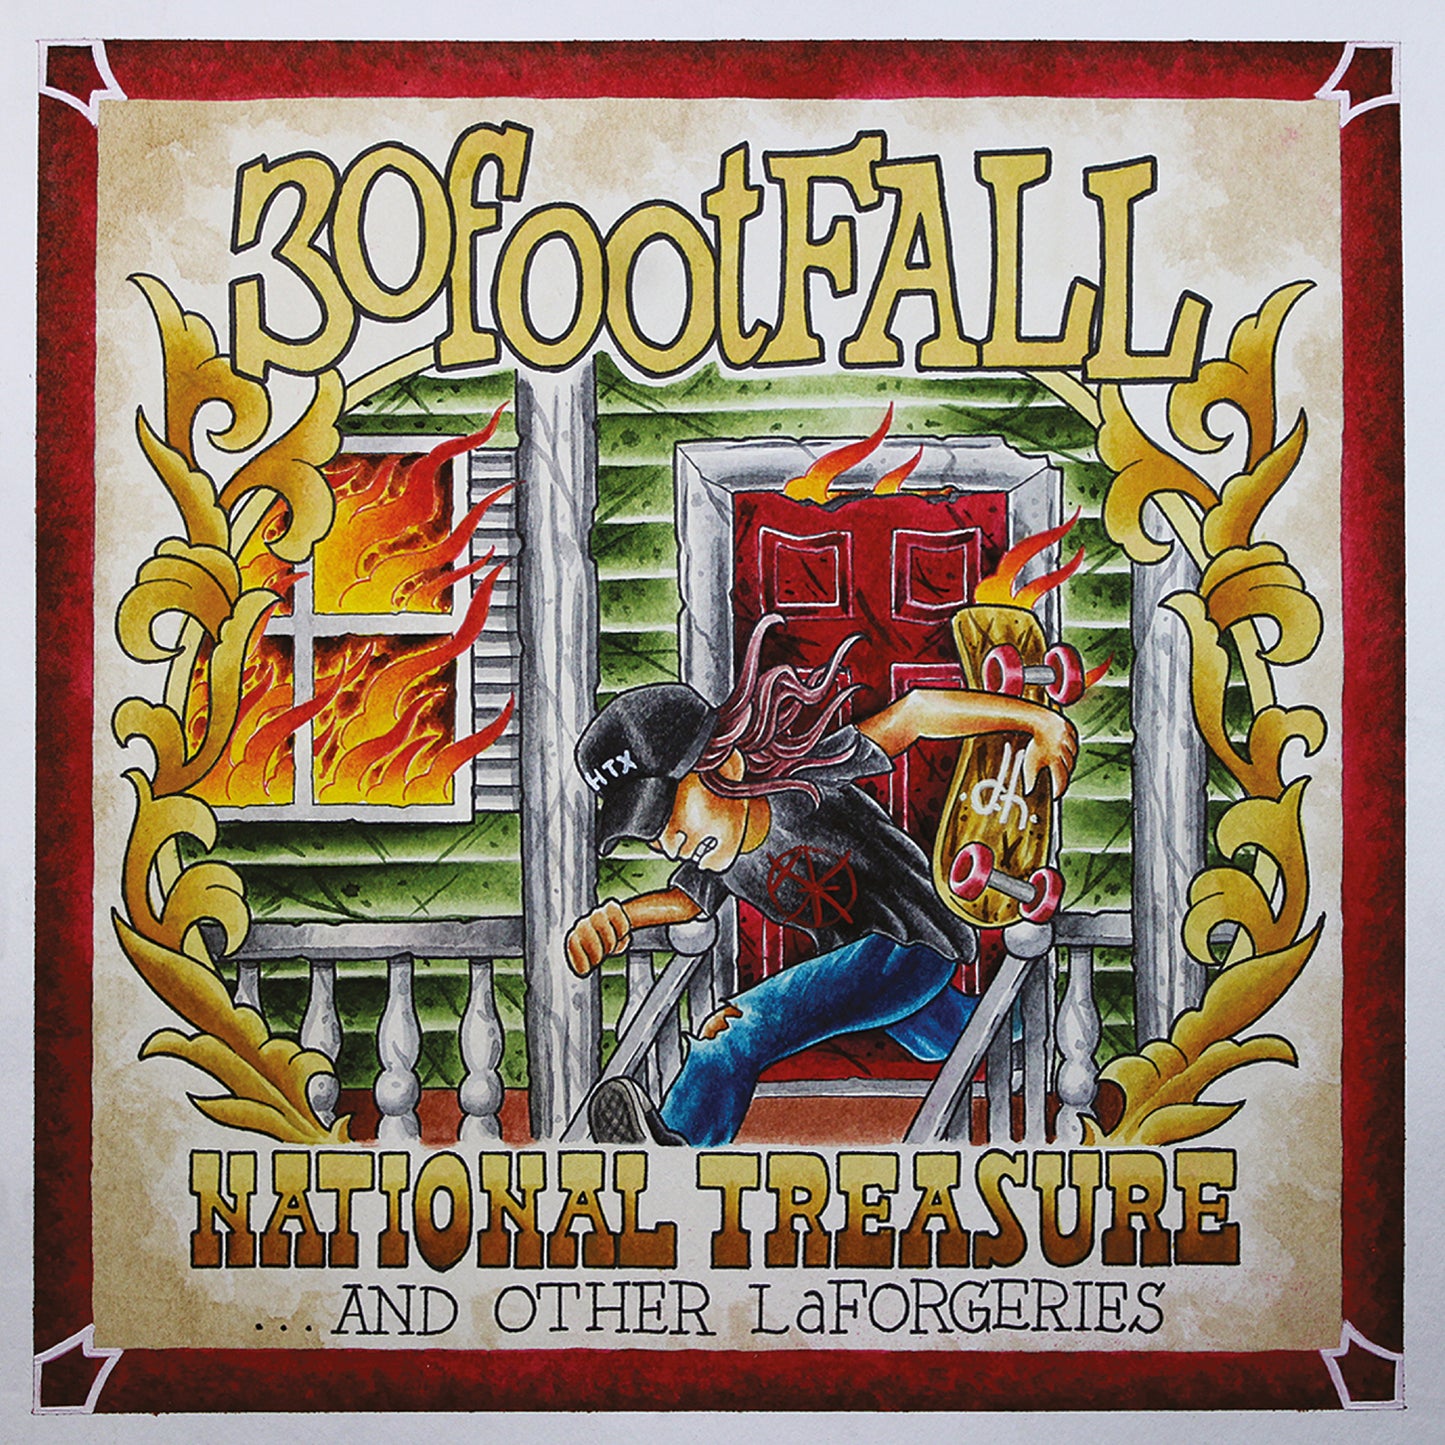 30footFALL - "National Treasure ...And Other LaForgeries" (Tape)